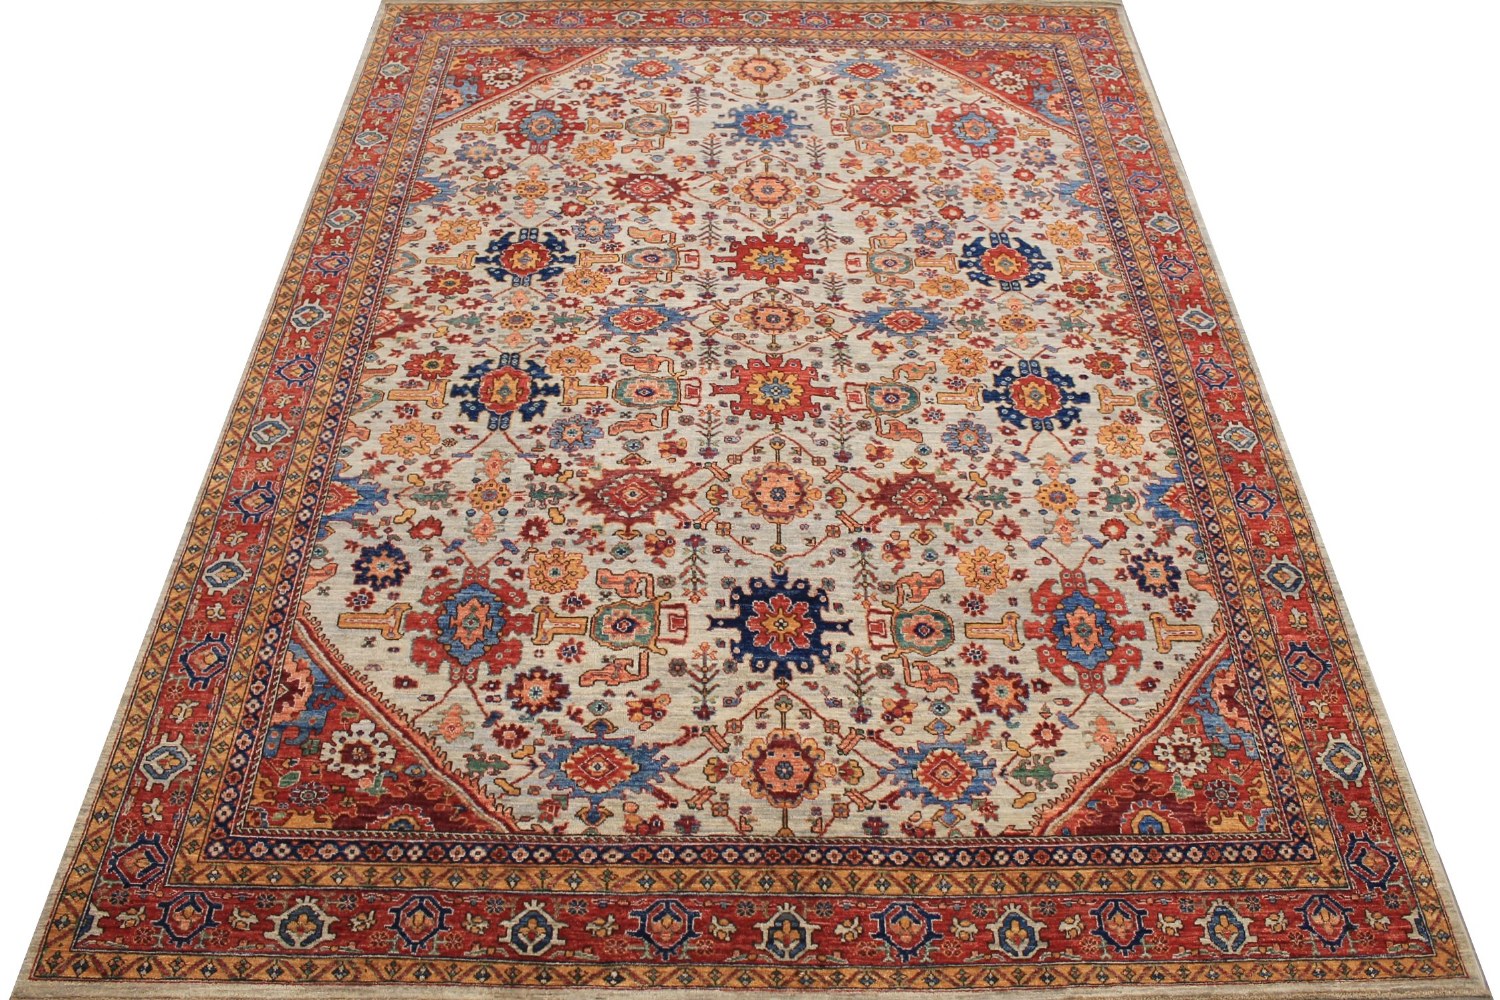 9x12 Aryana & Antique Revivals Hand Knotted Wool Area Rug - MR026084